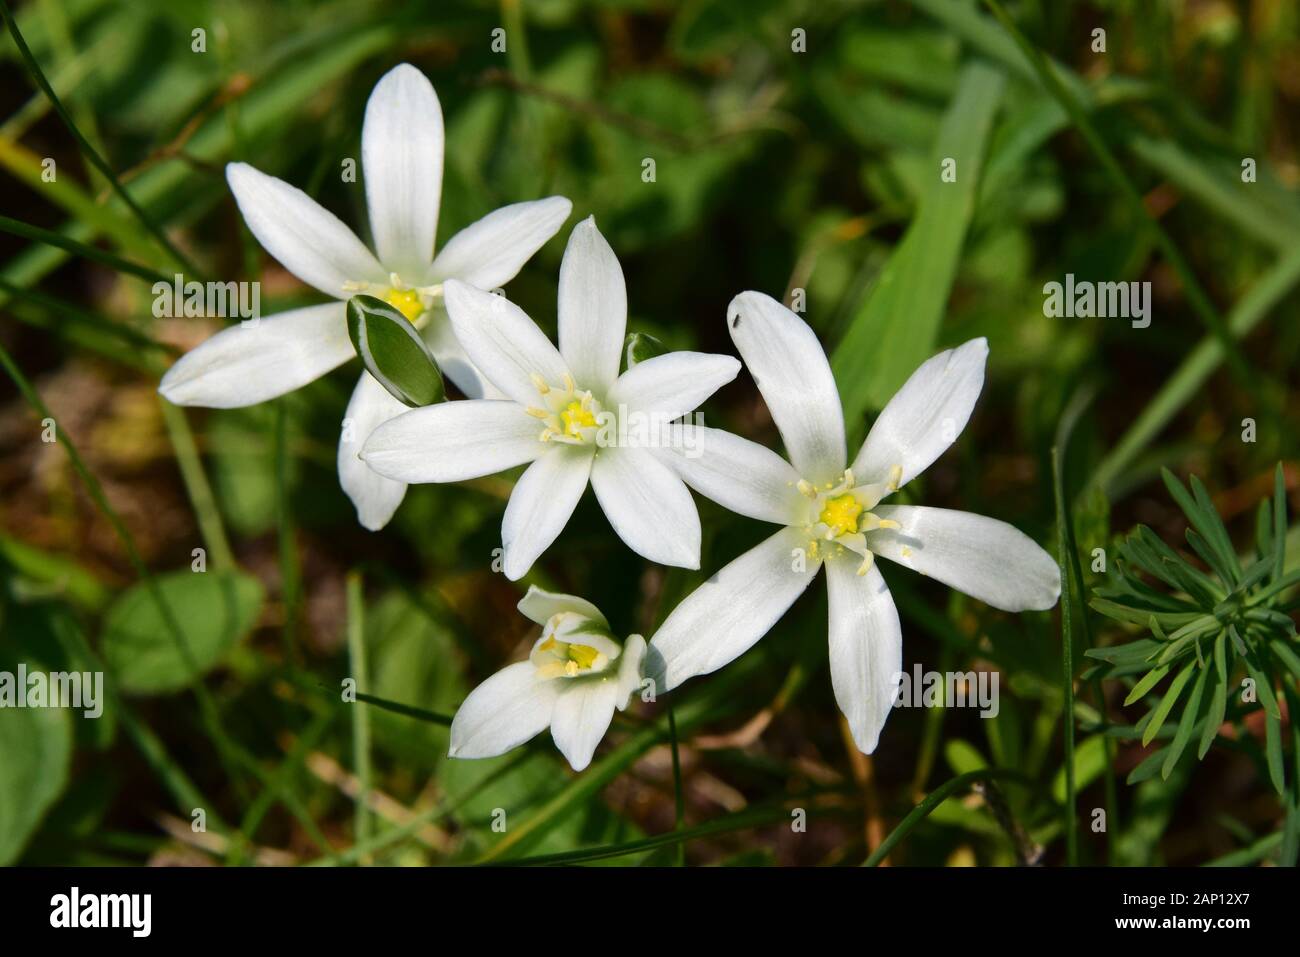 Star-of-Bethlehem, Grass Lily (Ornithogalum umbellatum), stalk with flowers and flower buds. Sweden Stock Photo